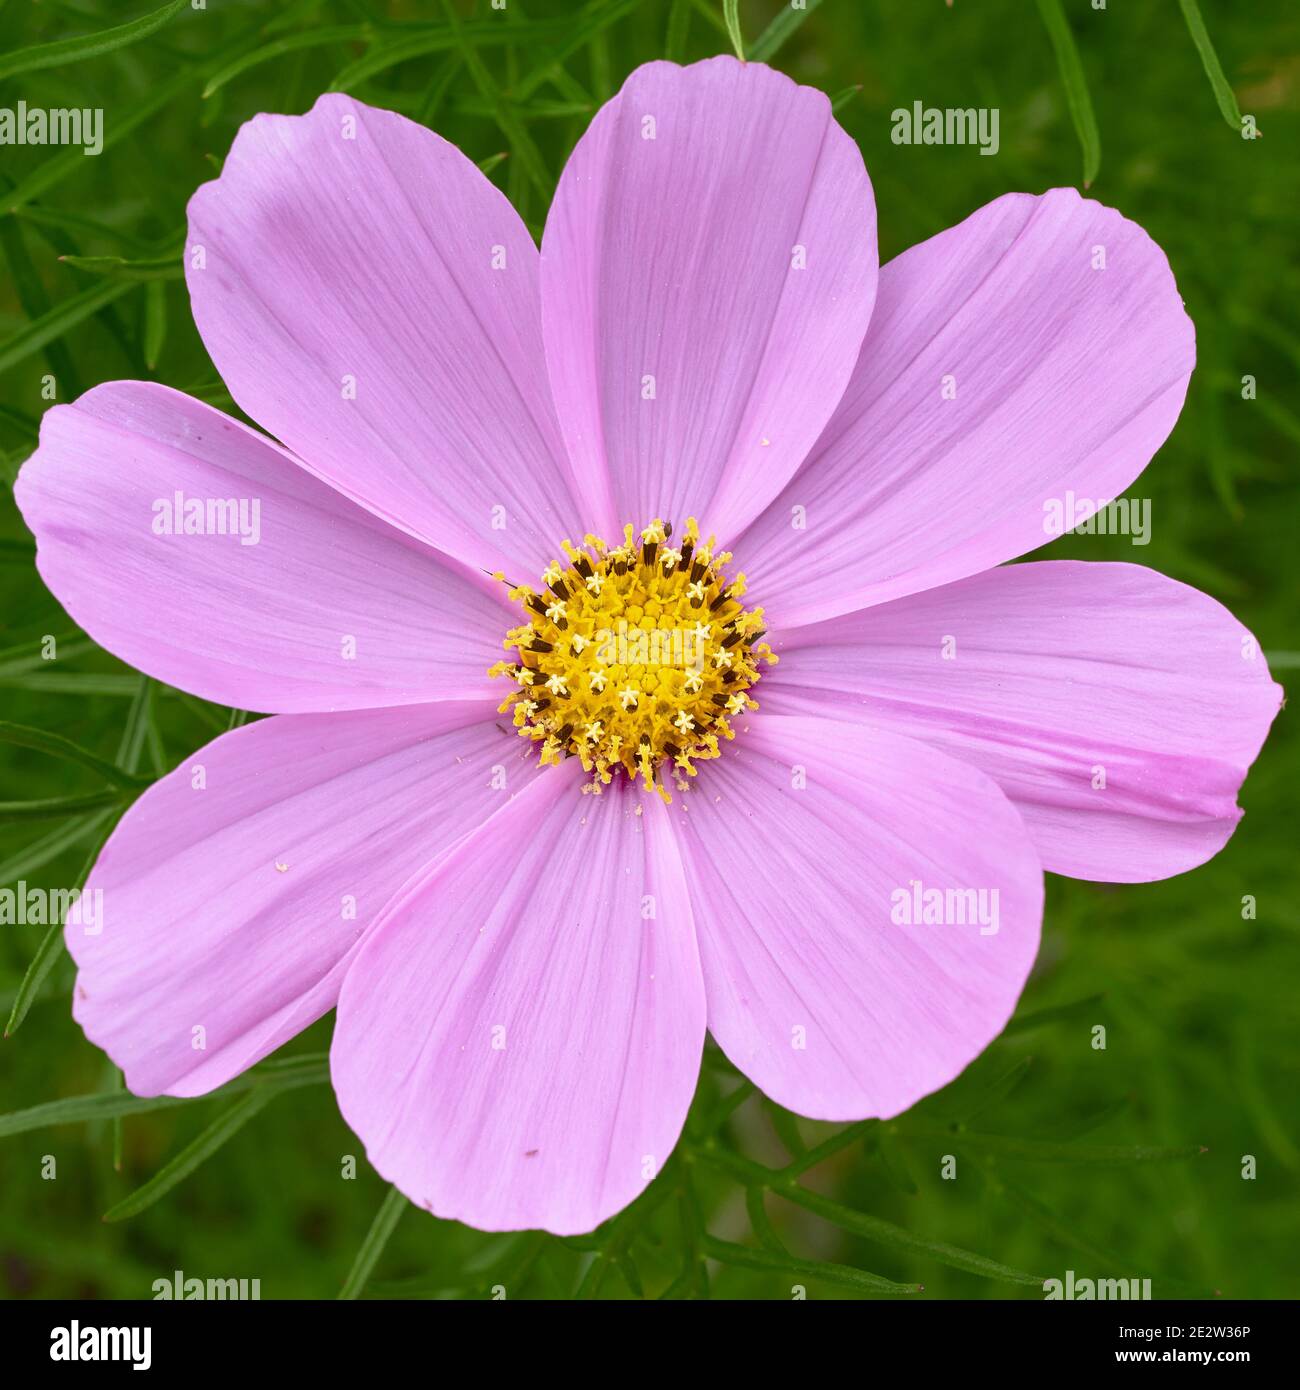 Cosmos flower close up Banque D'Images